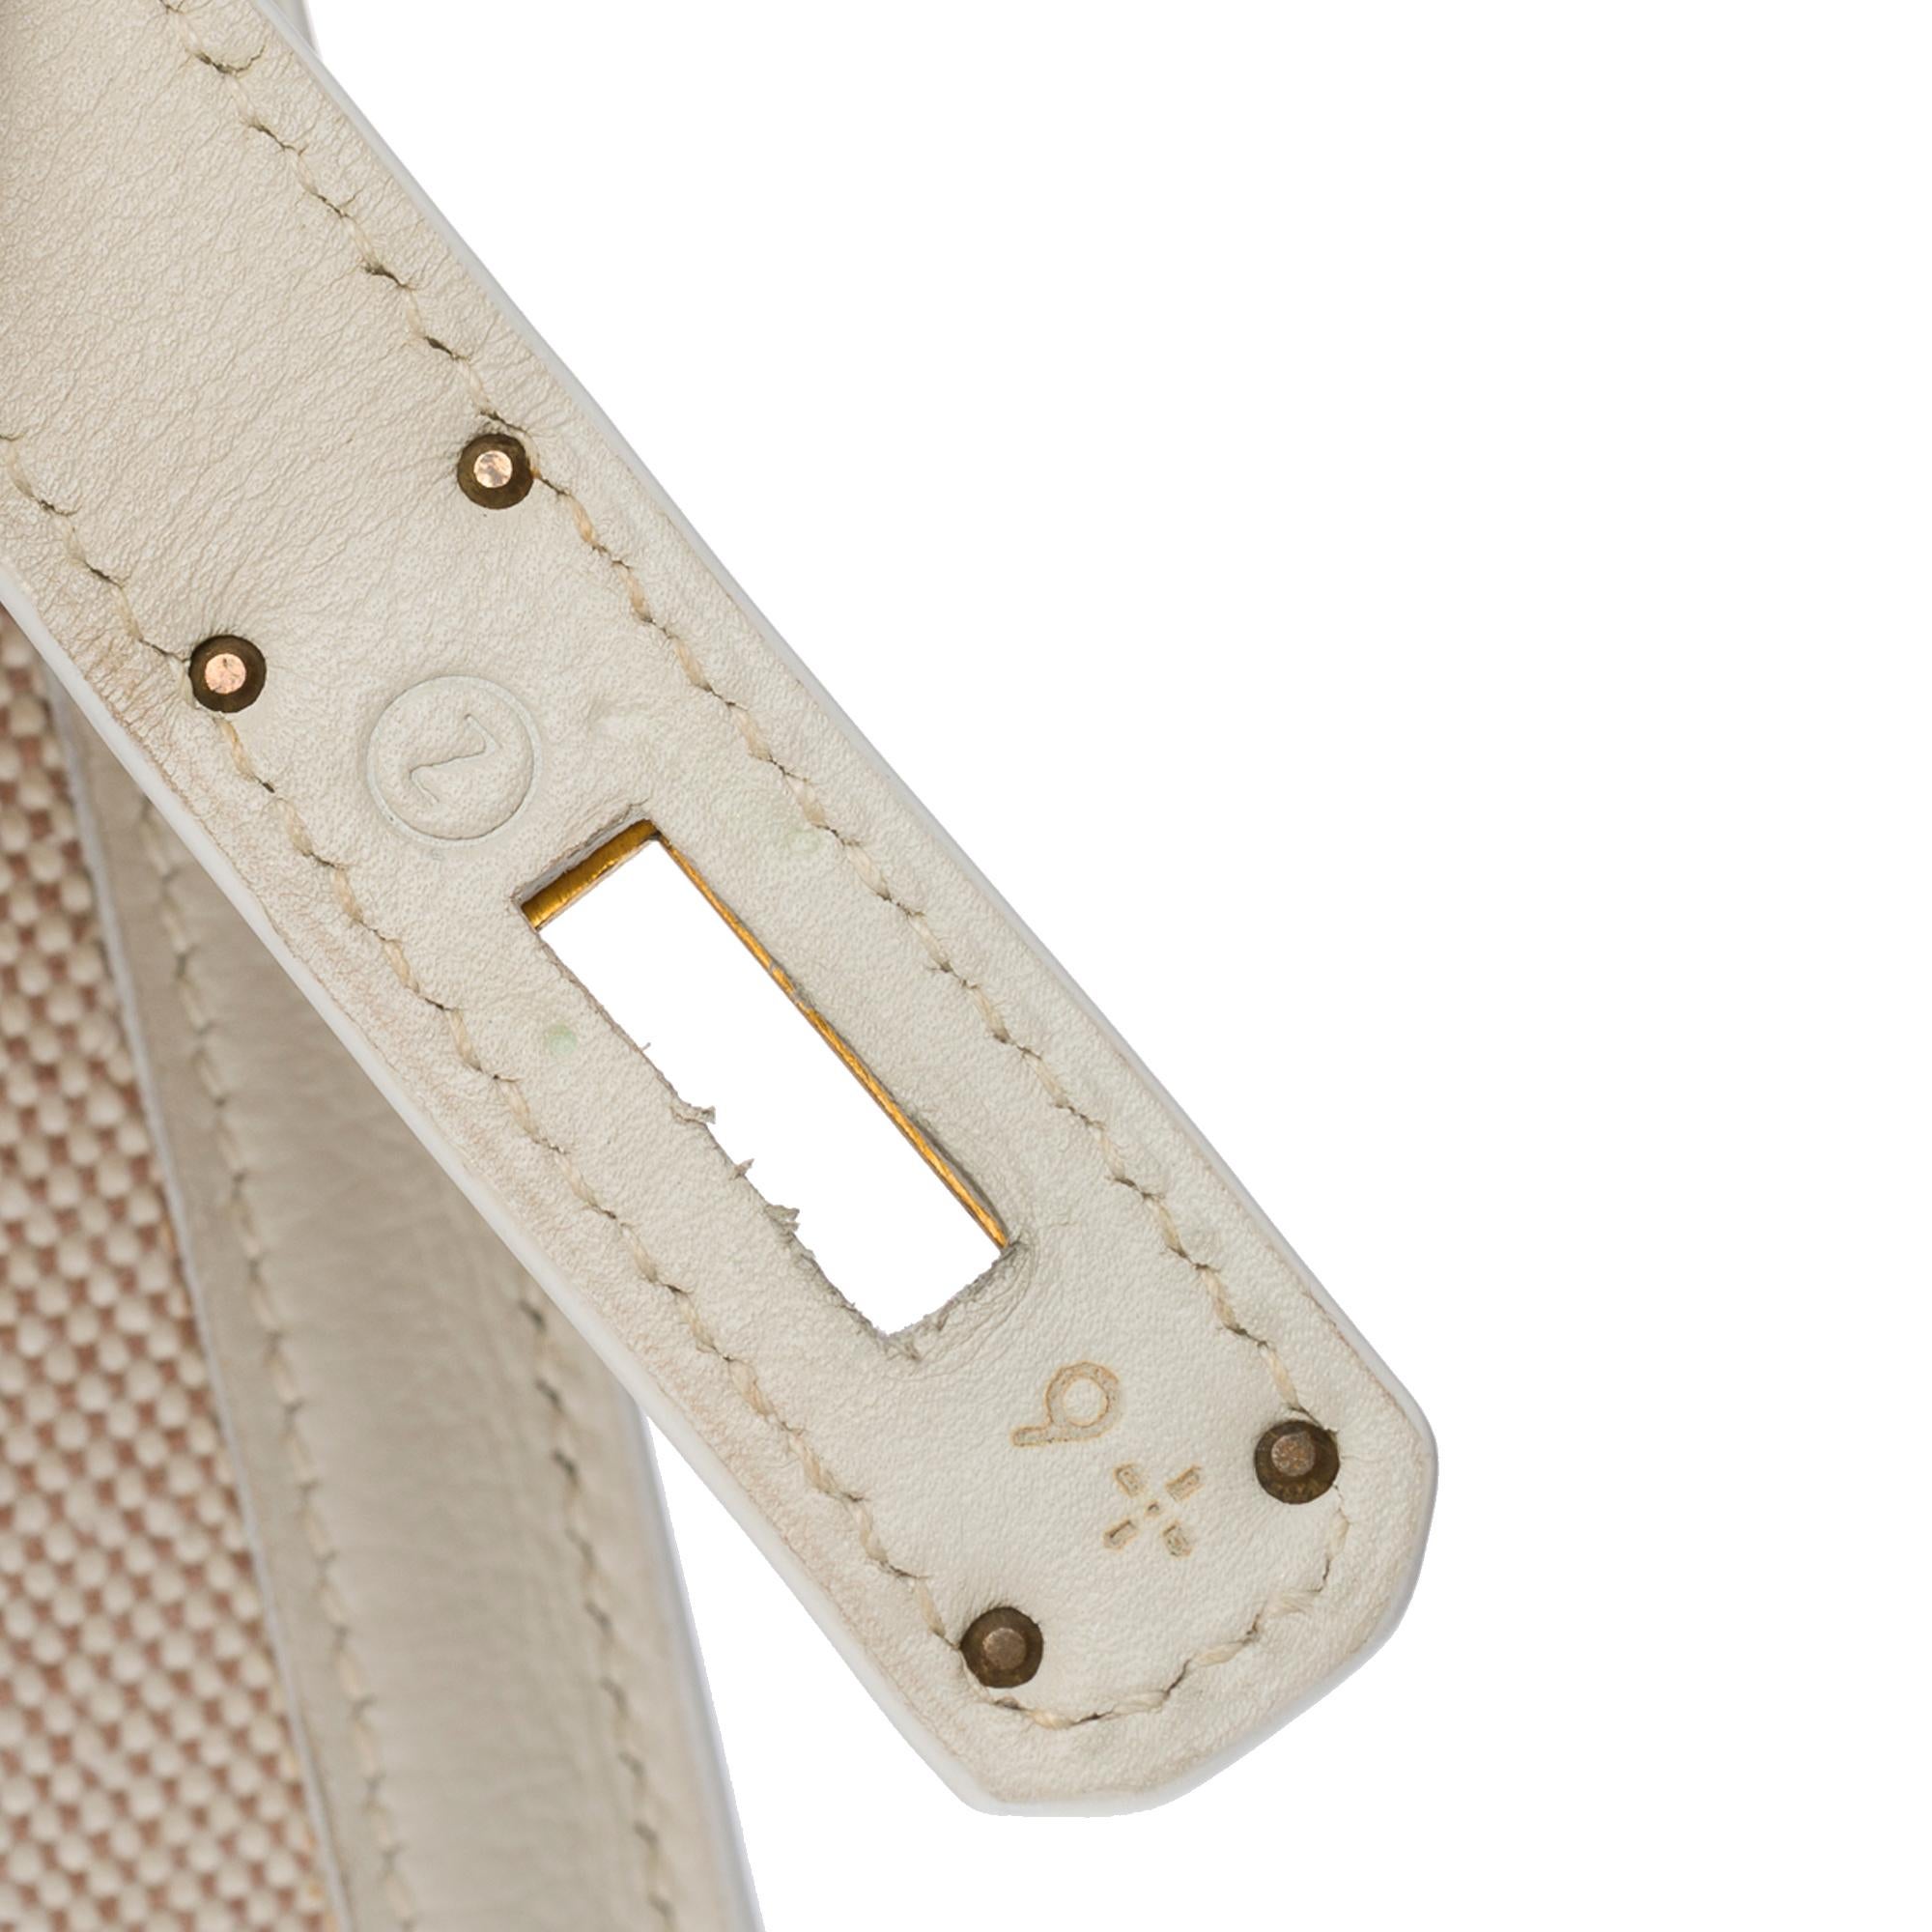 Hermès Kelly 28 sellier handbag strap in White canvas and Beige leather, GHW 2